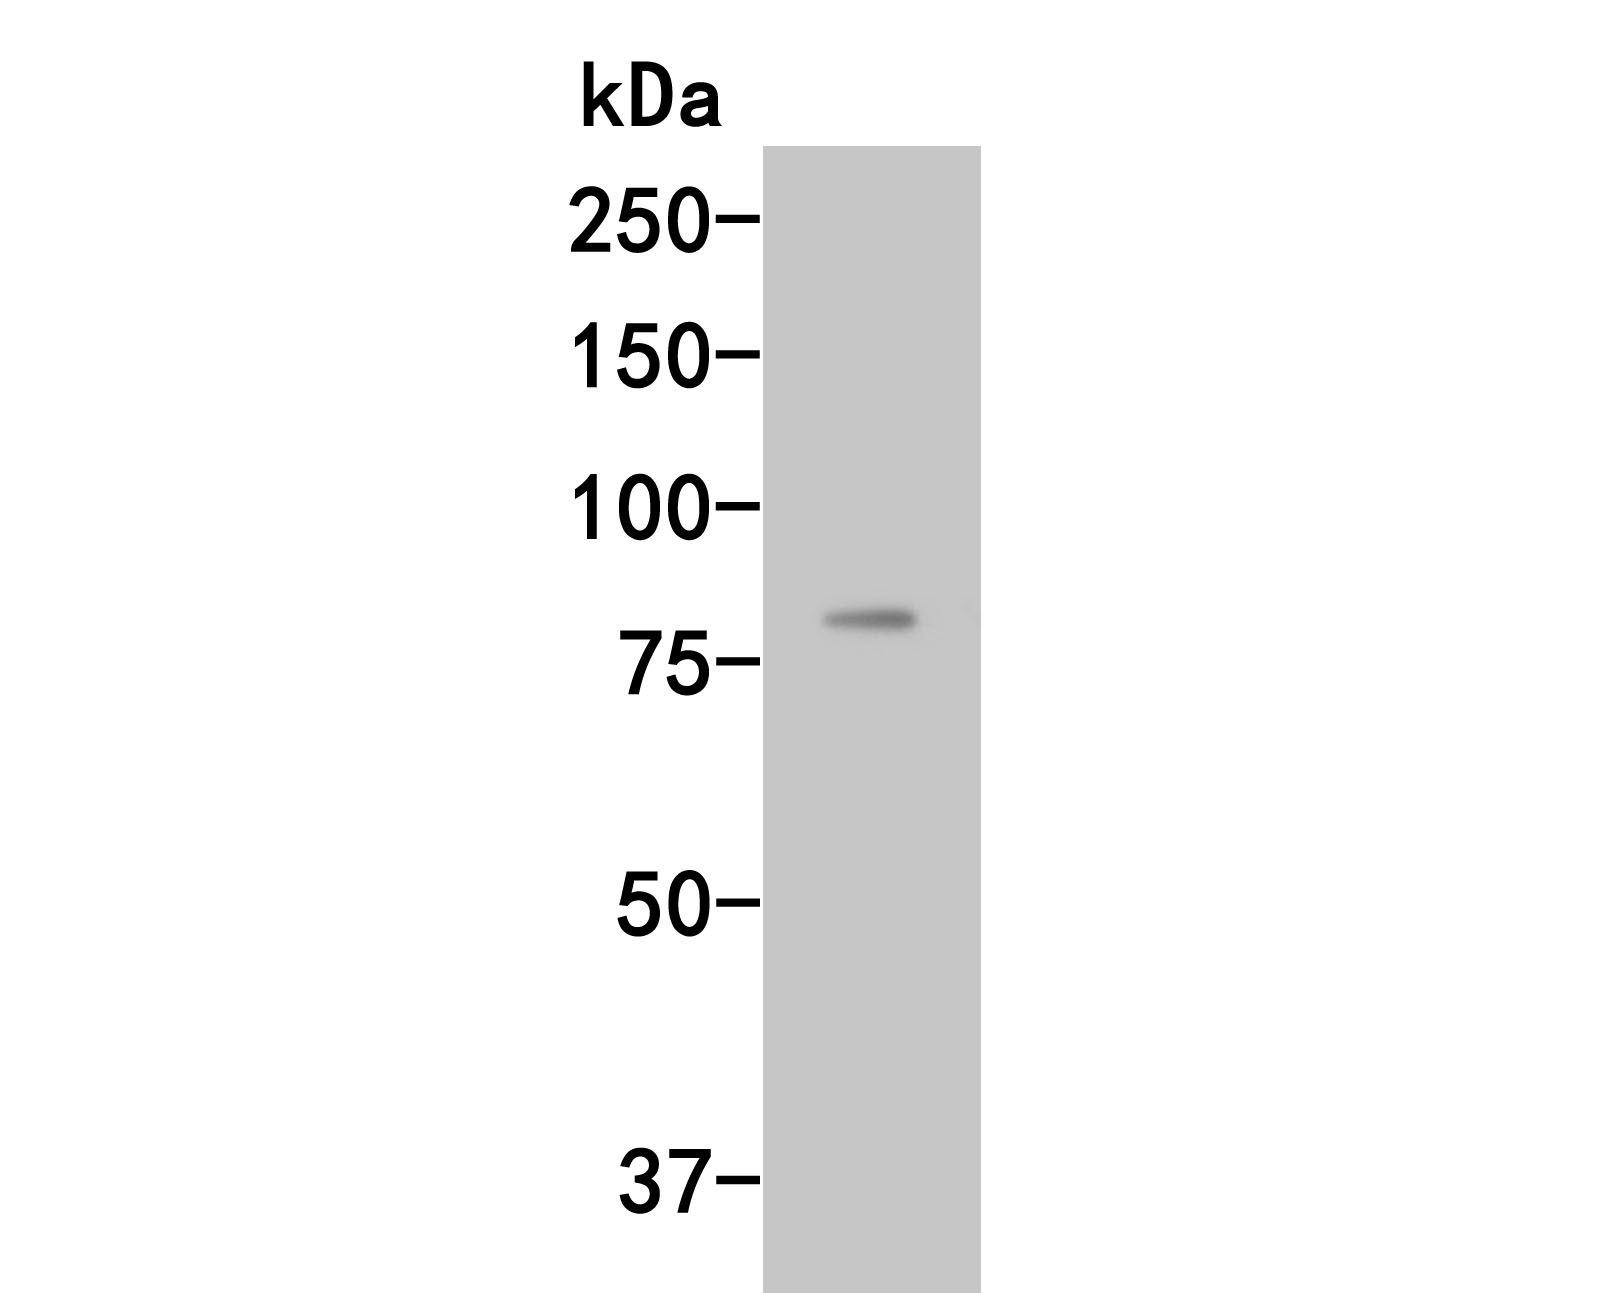 Western blot analysis of Complement factor B on rat liver tissue lysates. Proteins were transferred to a PVDF membrane and blocked with 5% BSA in PBS for 1 hour at room temperature. The primary antibody (HA500036, 1/500) was used in 5% BSA at room temperature for 2 hours. Goat Anti-Rabbit IgG - HRP Secondary Antibody (HA1001) at 1:5,000 dilution was used for 1 hour at room temperature.